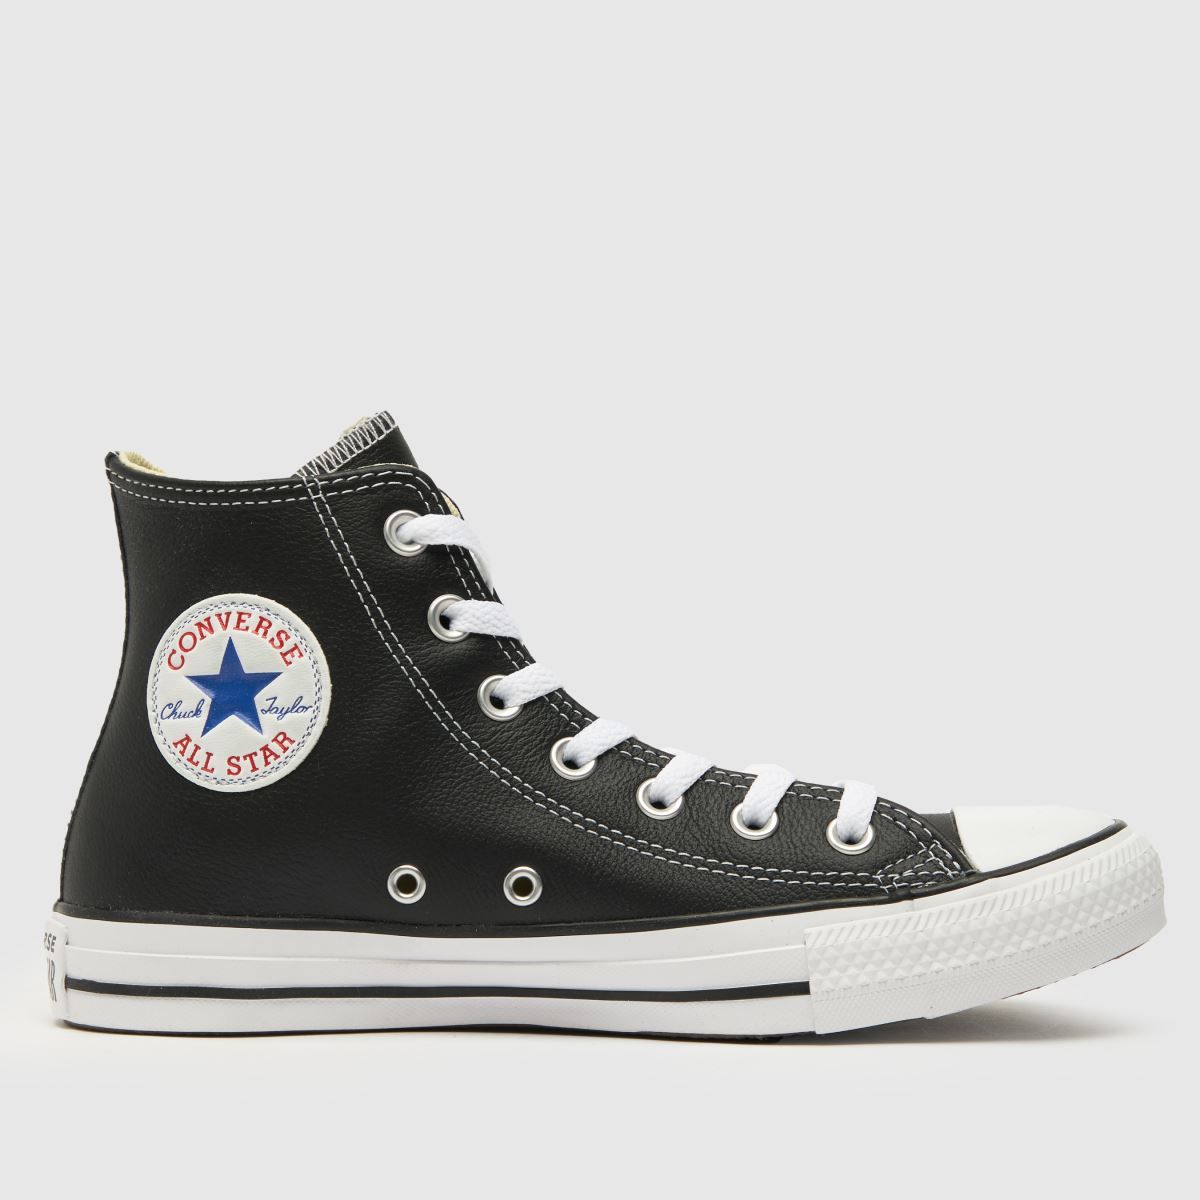 Converse black & white all star hi leather trainers | Schuh